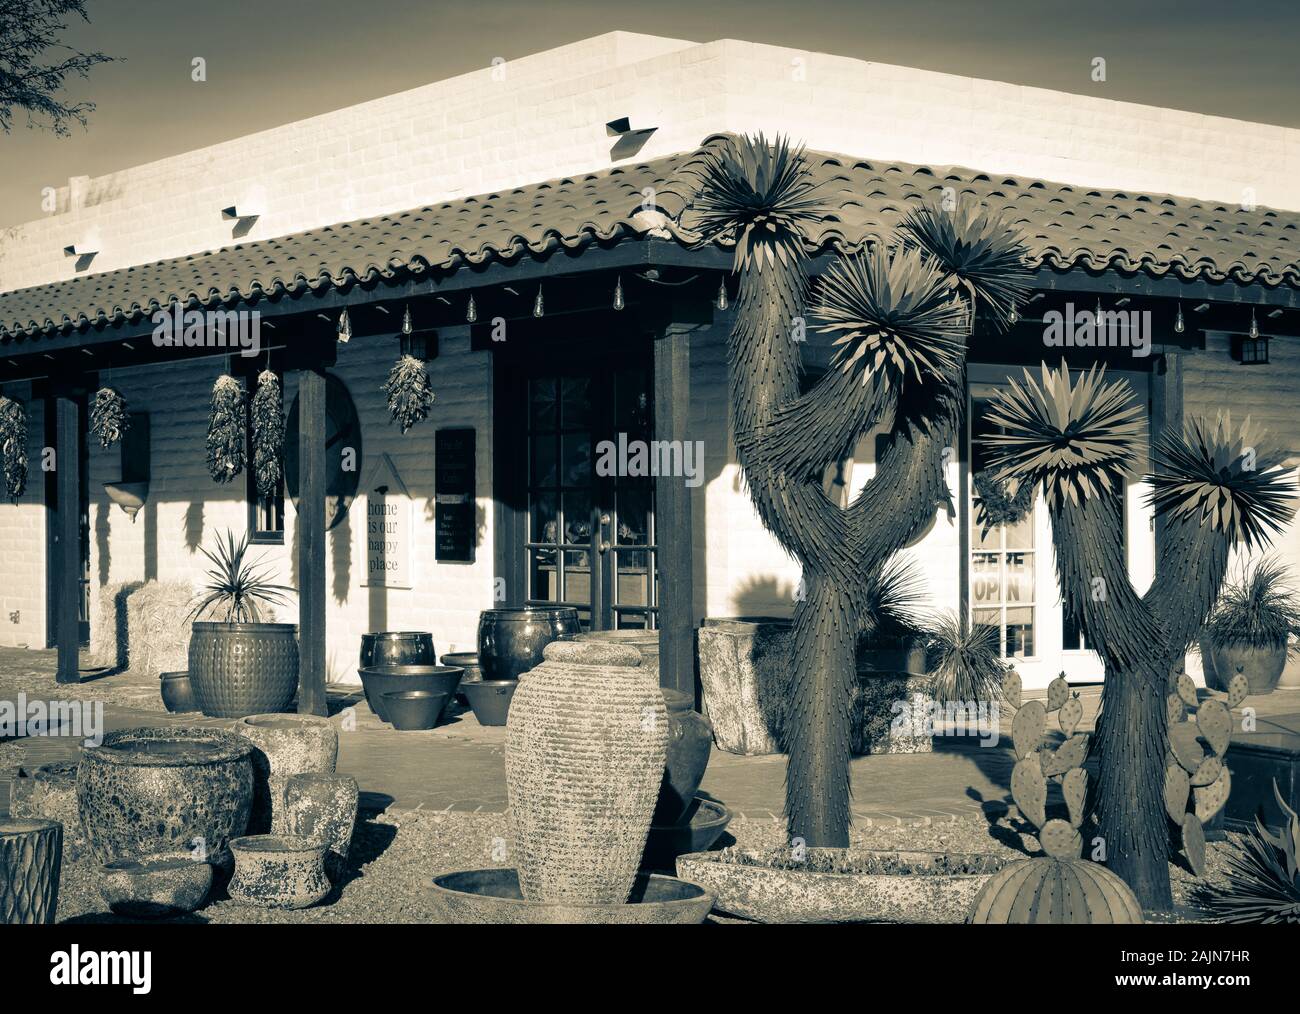 Amazing metal sculptures of Joshua Tree cacti on display outside of ZForrest Fine Art & Contemporary Gallery in old adobe brick building in Tubac, AZ Stock Photo